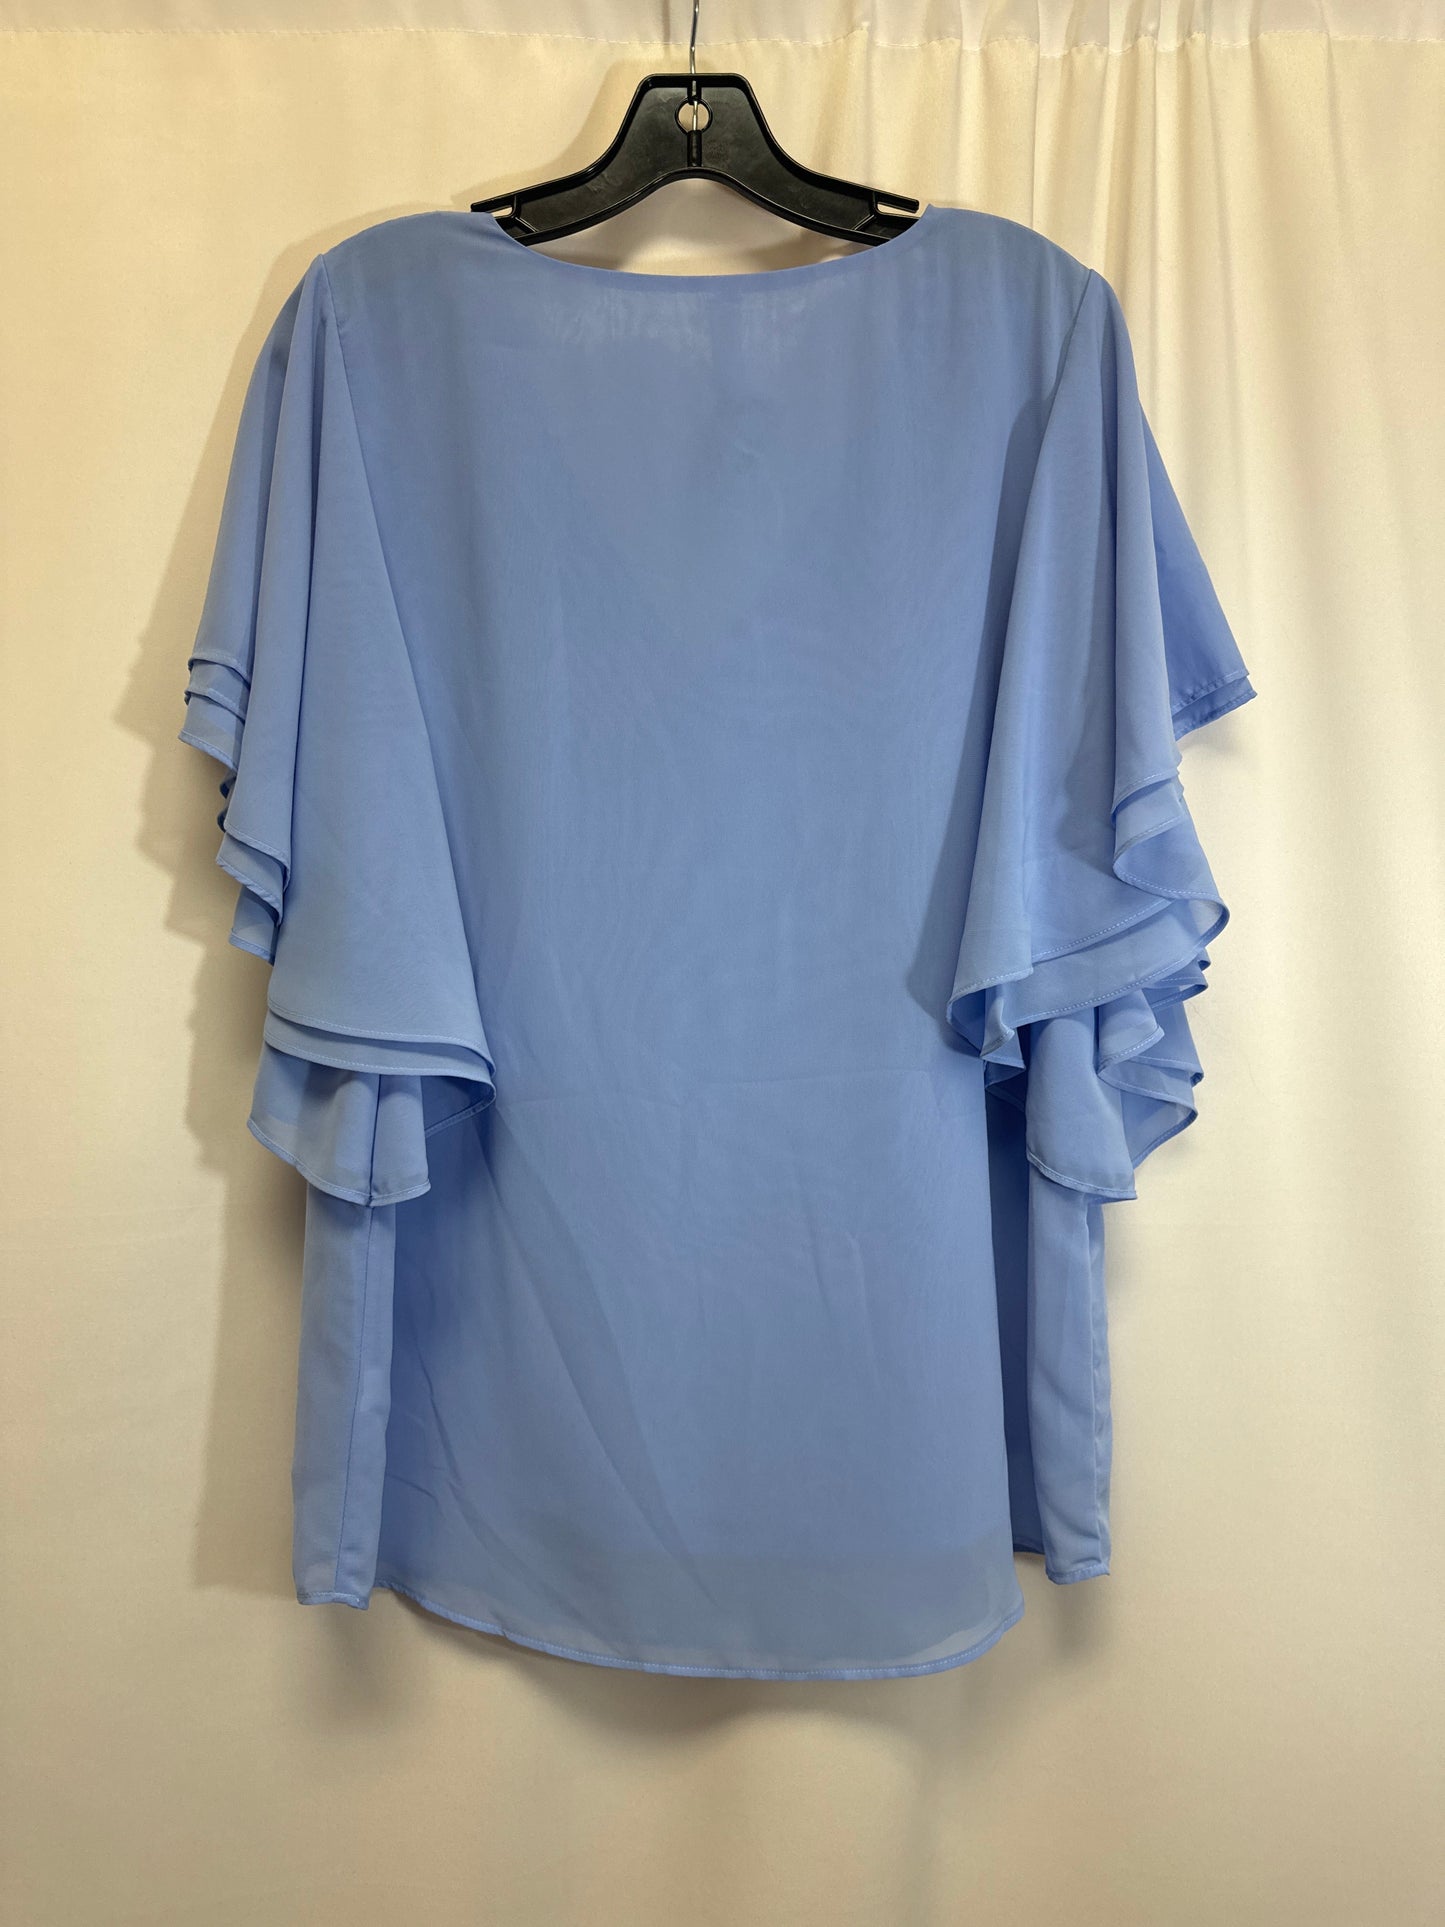 Blue Top Short Sleeve Zenana Outfitters, Size Xl